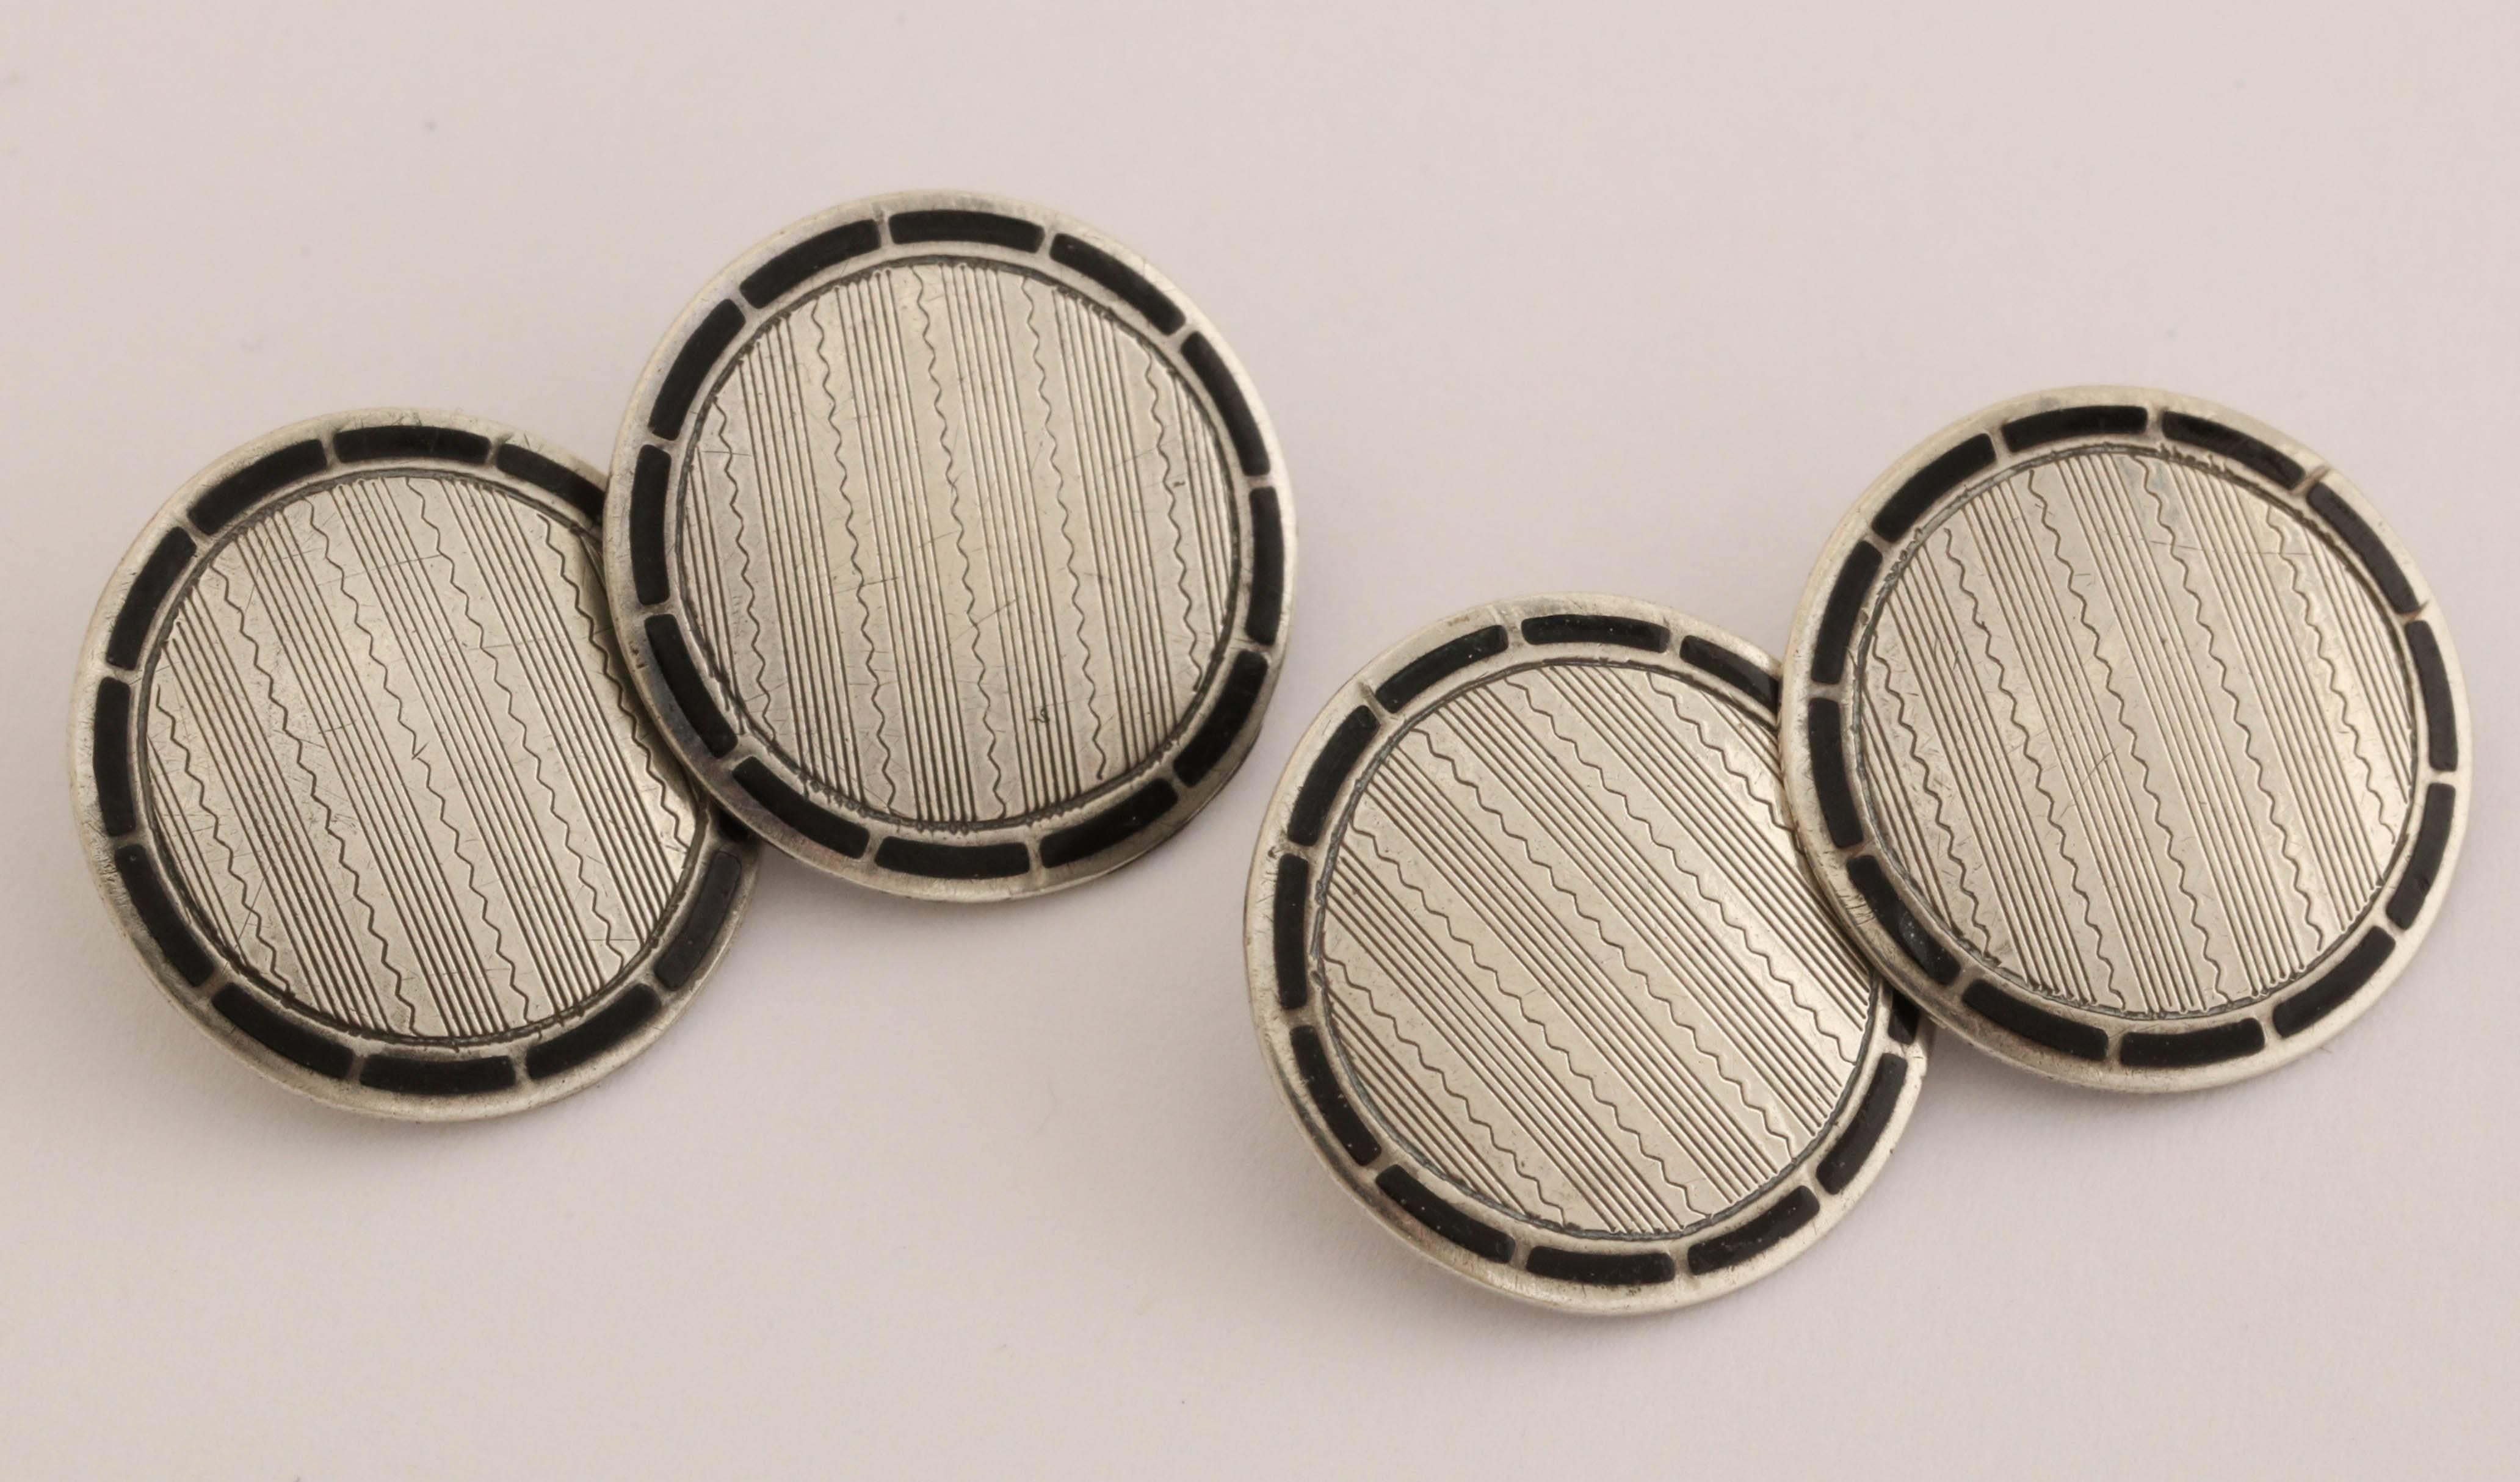 American Art Deco Sterling Silver and Black Guilloche Enamel Cufflinks In New Condition For Sale In New York, NY